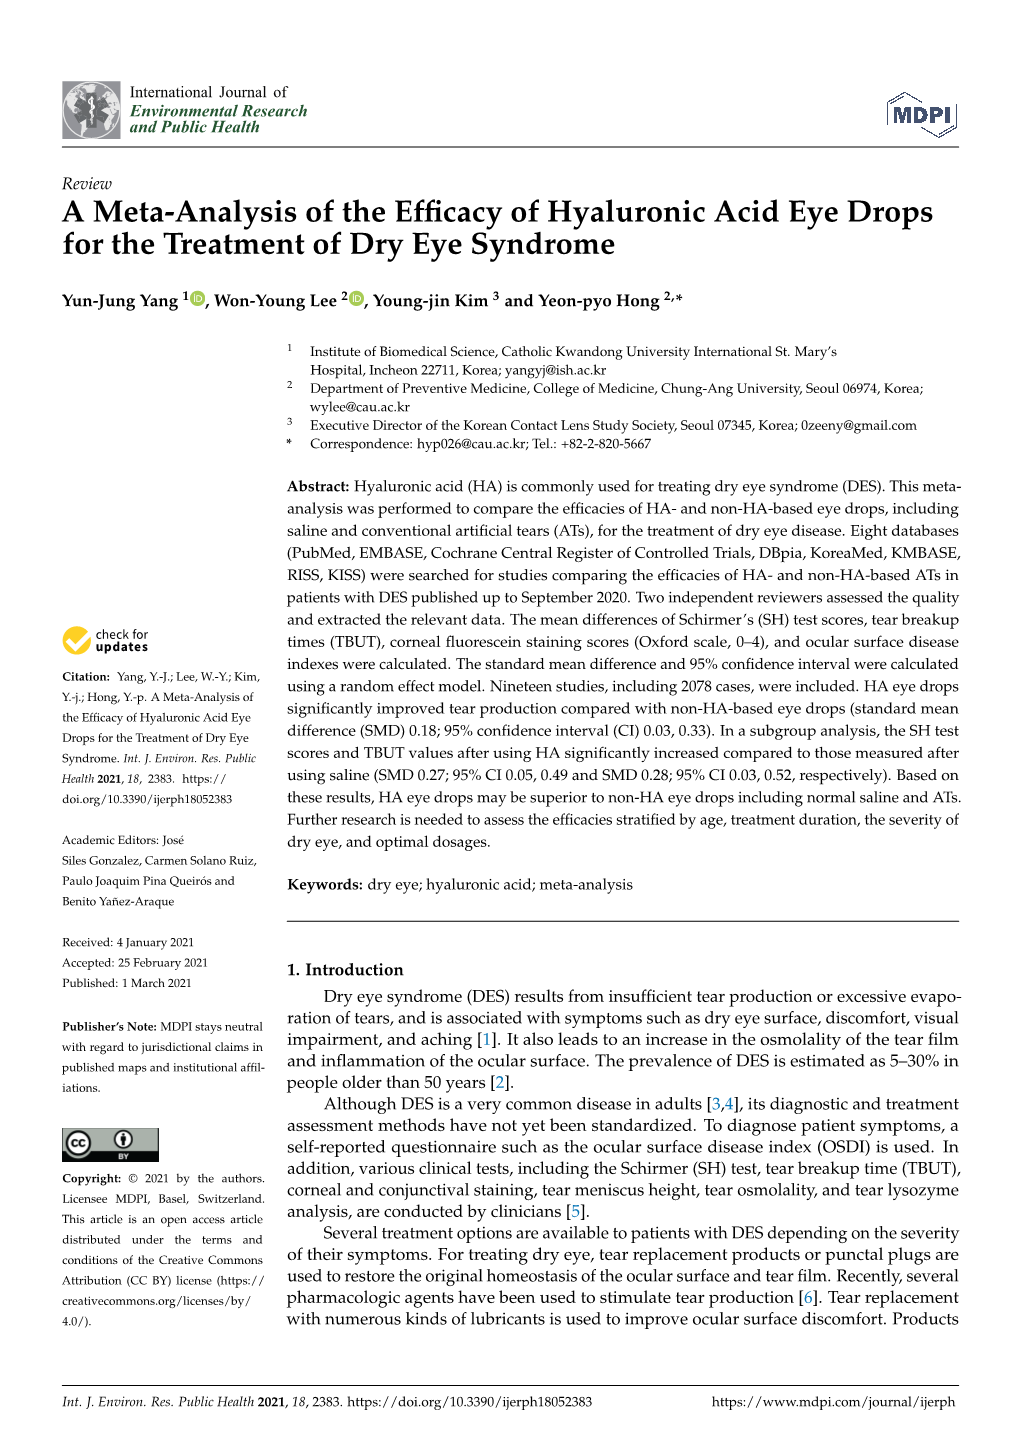 A Meta-Analysis of the Efficacy of Hyaluronic Acid Eye Drops